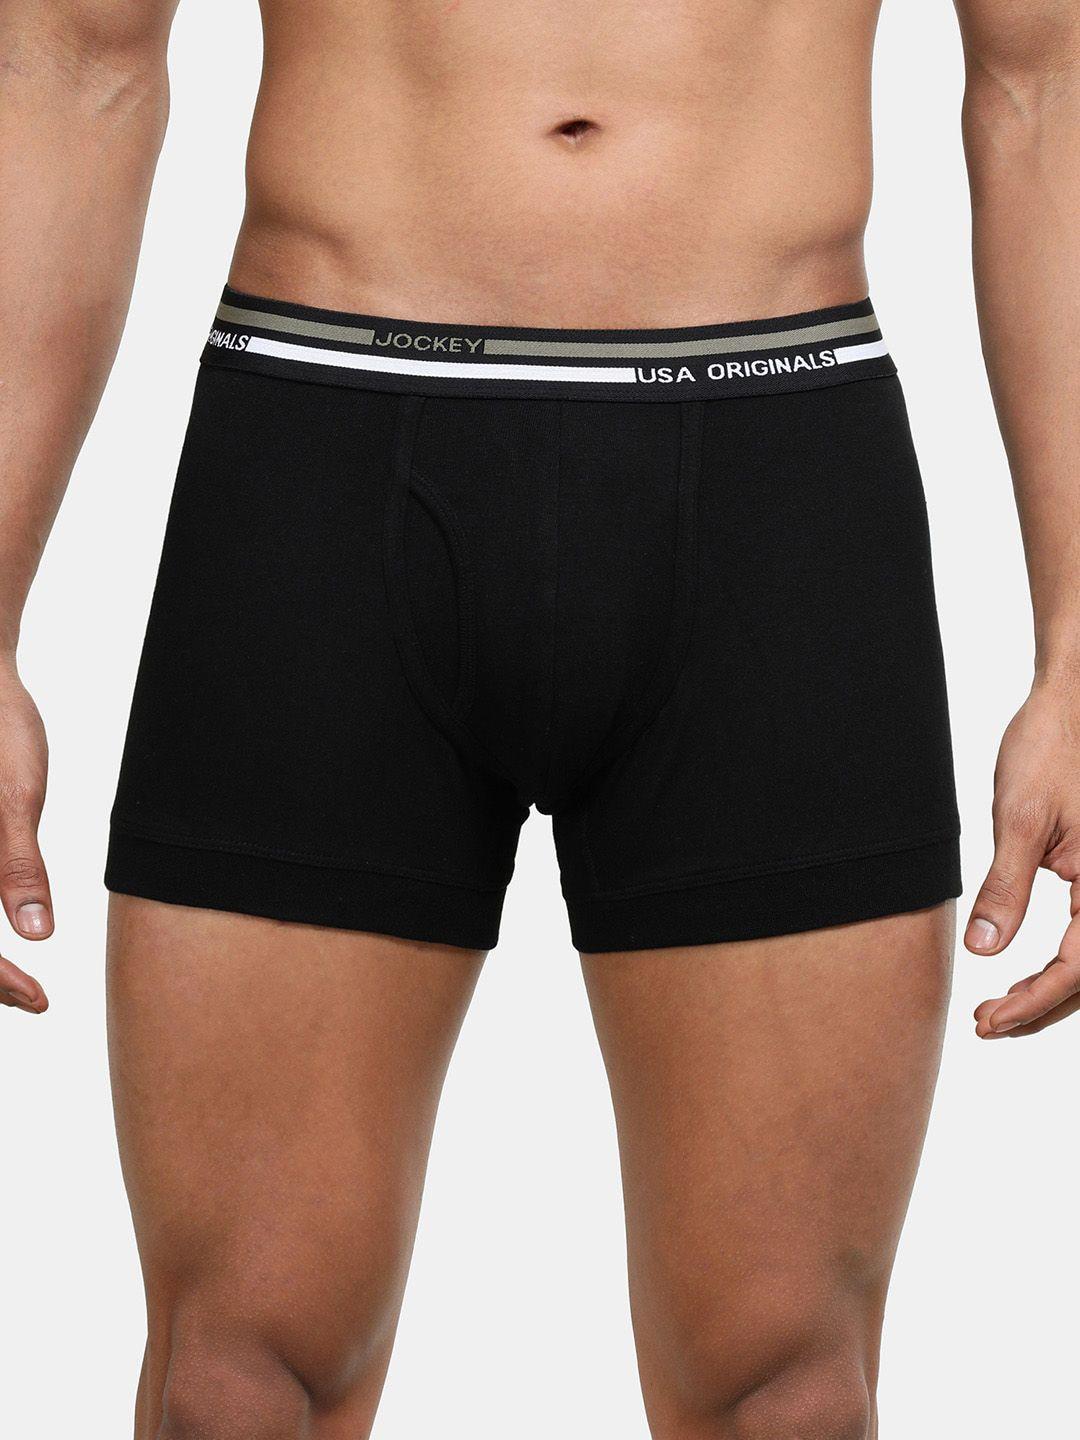 jockey men super combed cotton trunk with ultrasoft and durable waistband ui22-0105